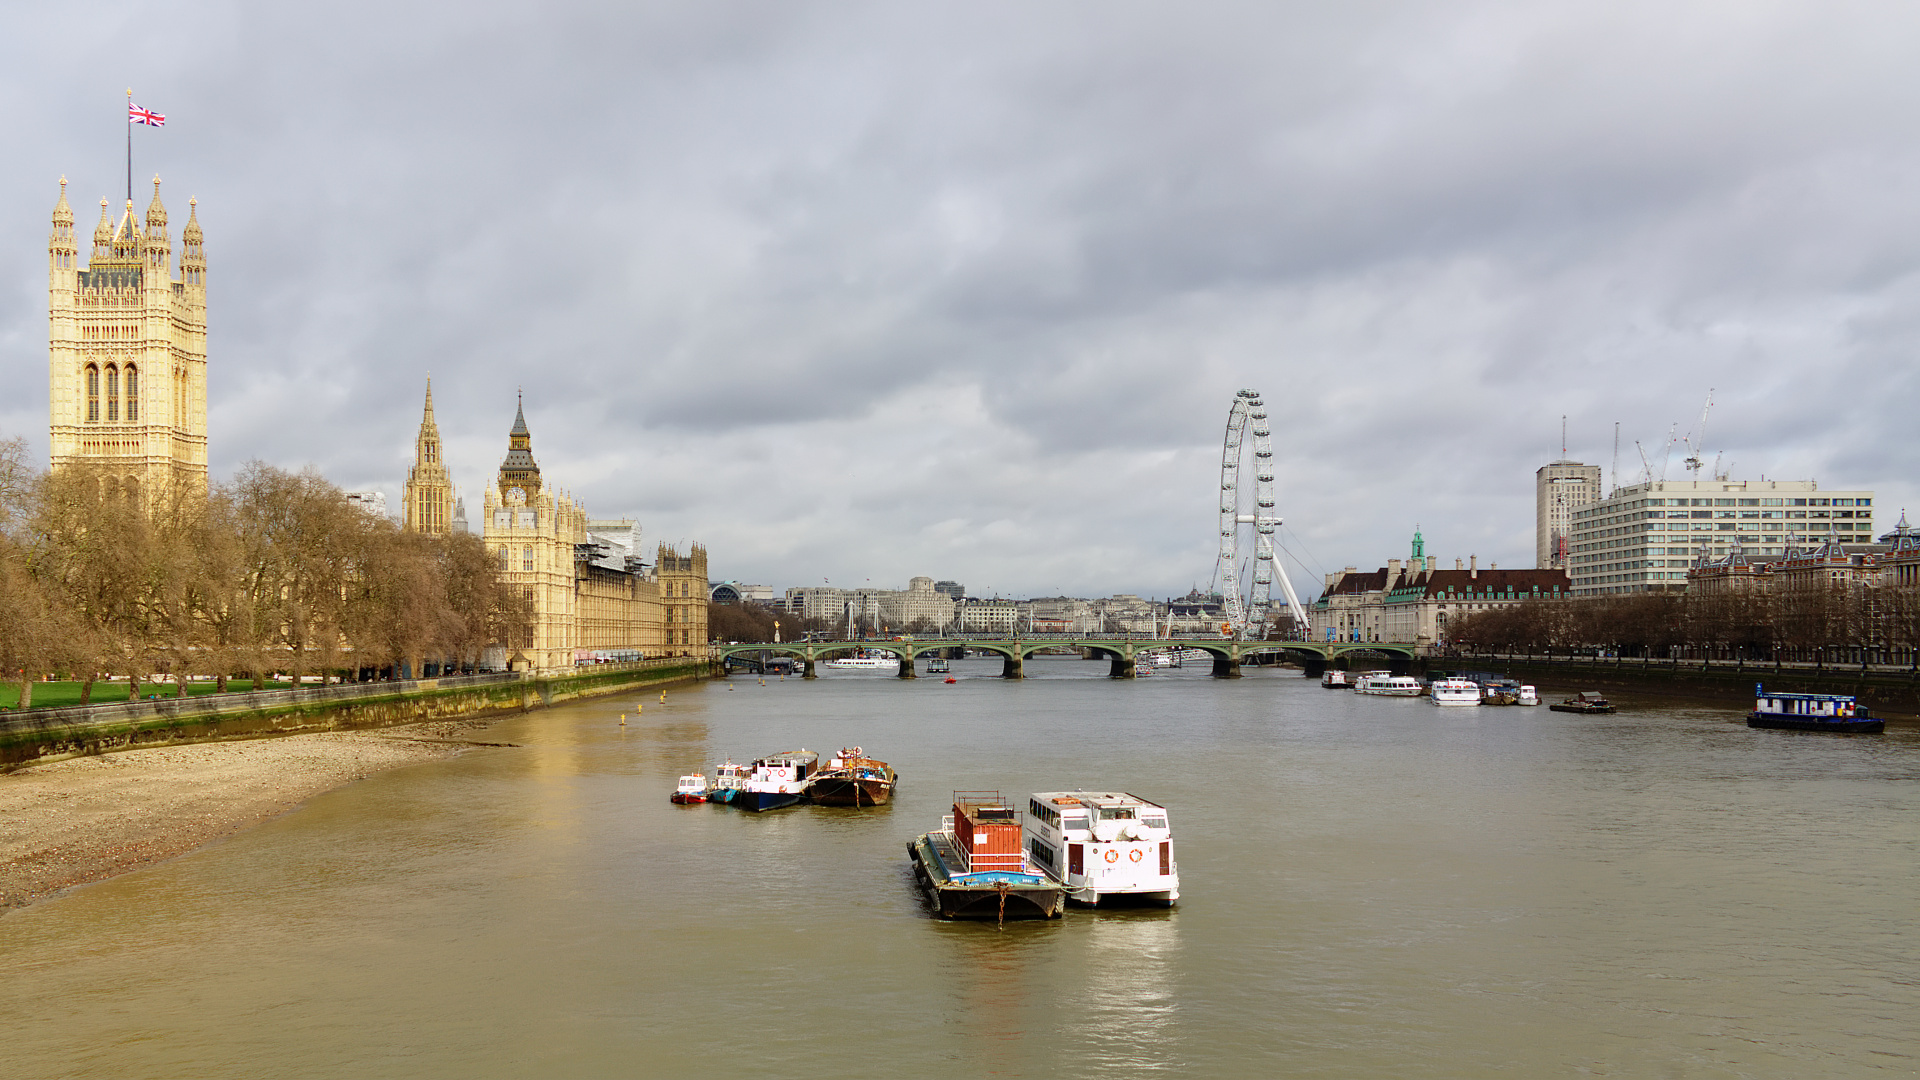 Westminster from Lambeth Bridge (Travels » London » London at Day)